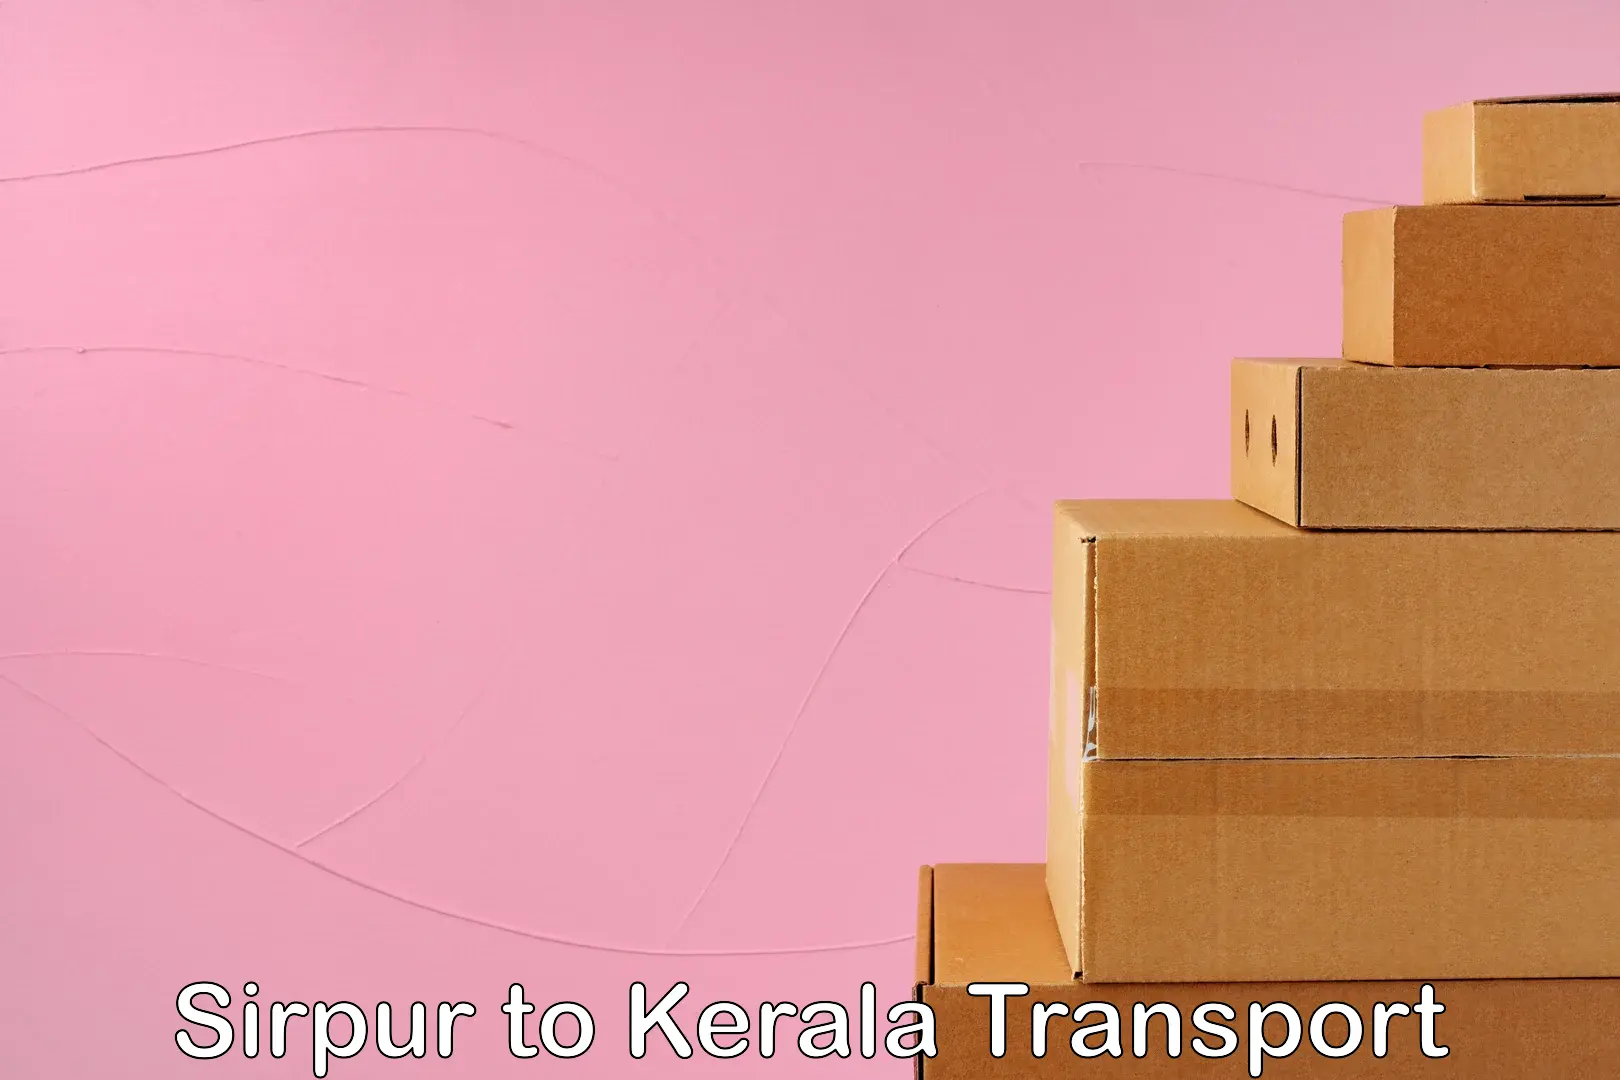 Truck transport companies in India Sirpur to Attingal